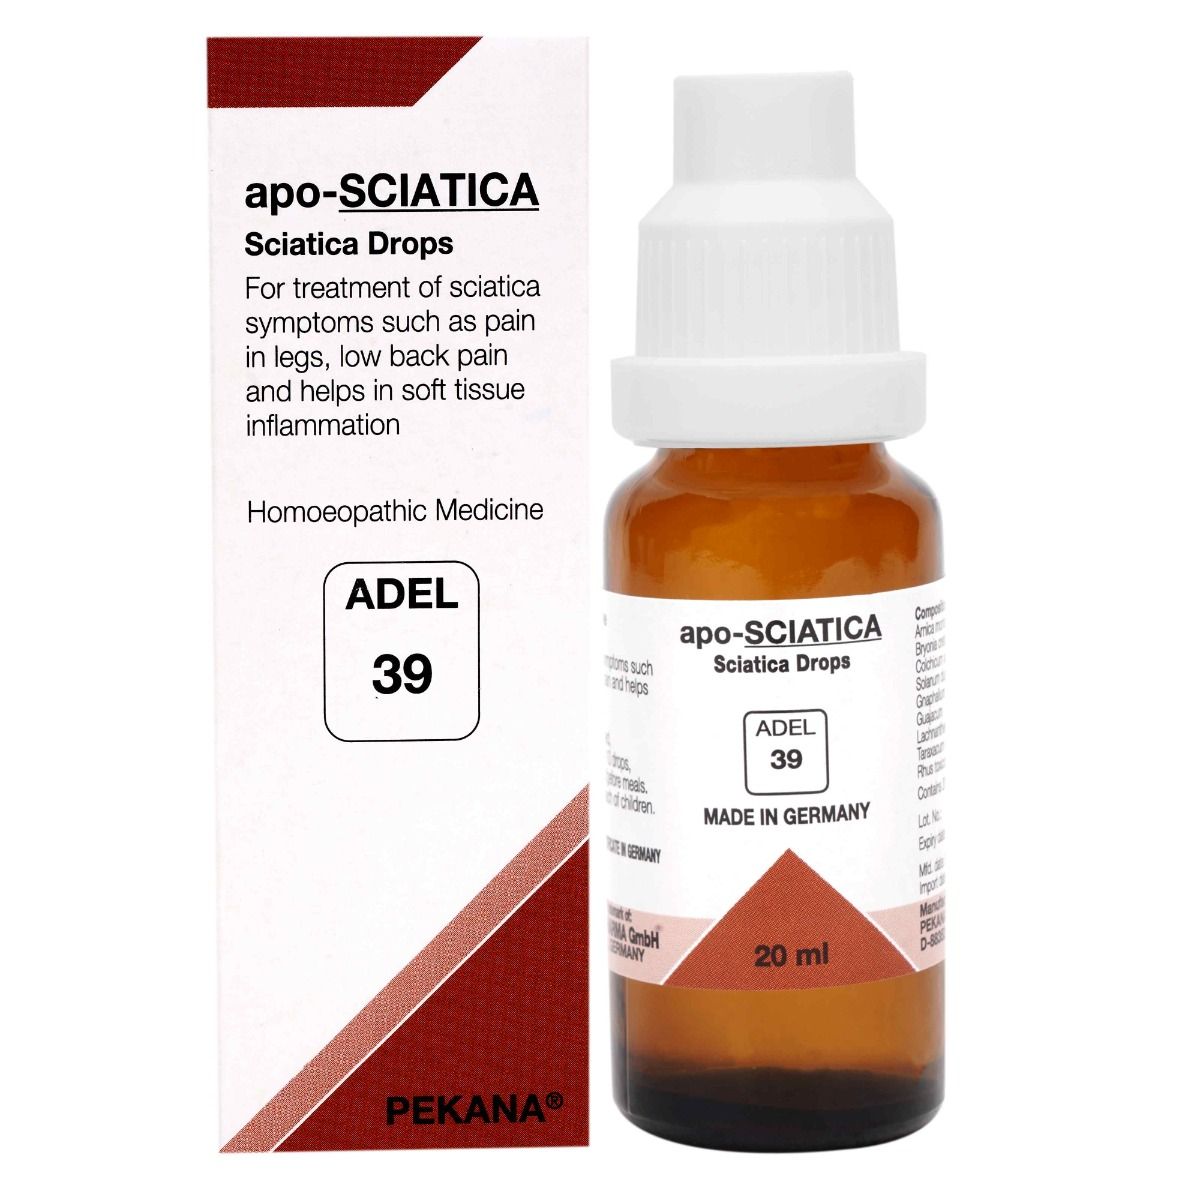 Adel-39, Homeopathic Medicine For Sciatica, Homeopathy For, 49% OFF